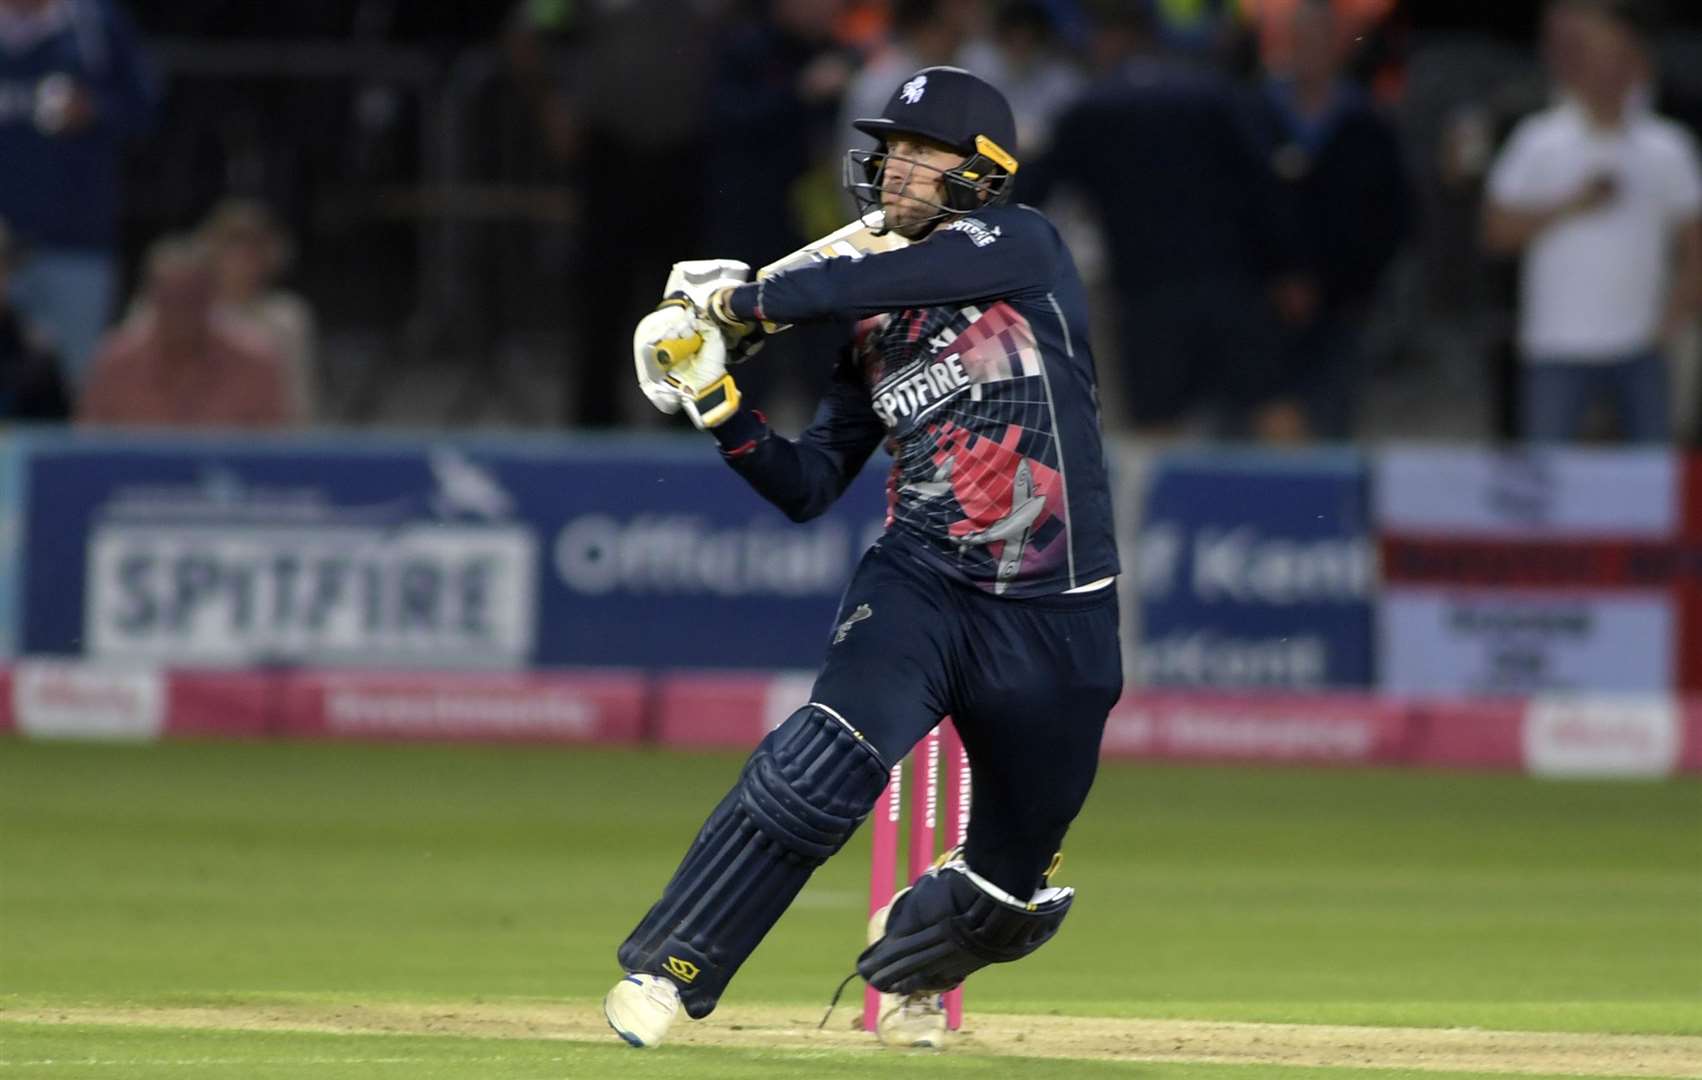 Alex Blake in T20 action for Kent Spitfires last year on their way to title glory. Picture: Barry Goodwin